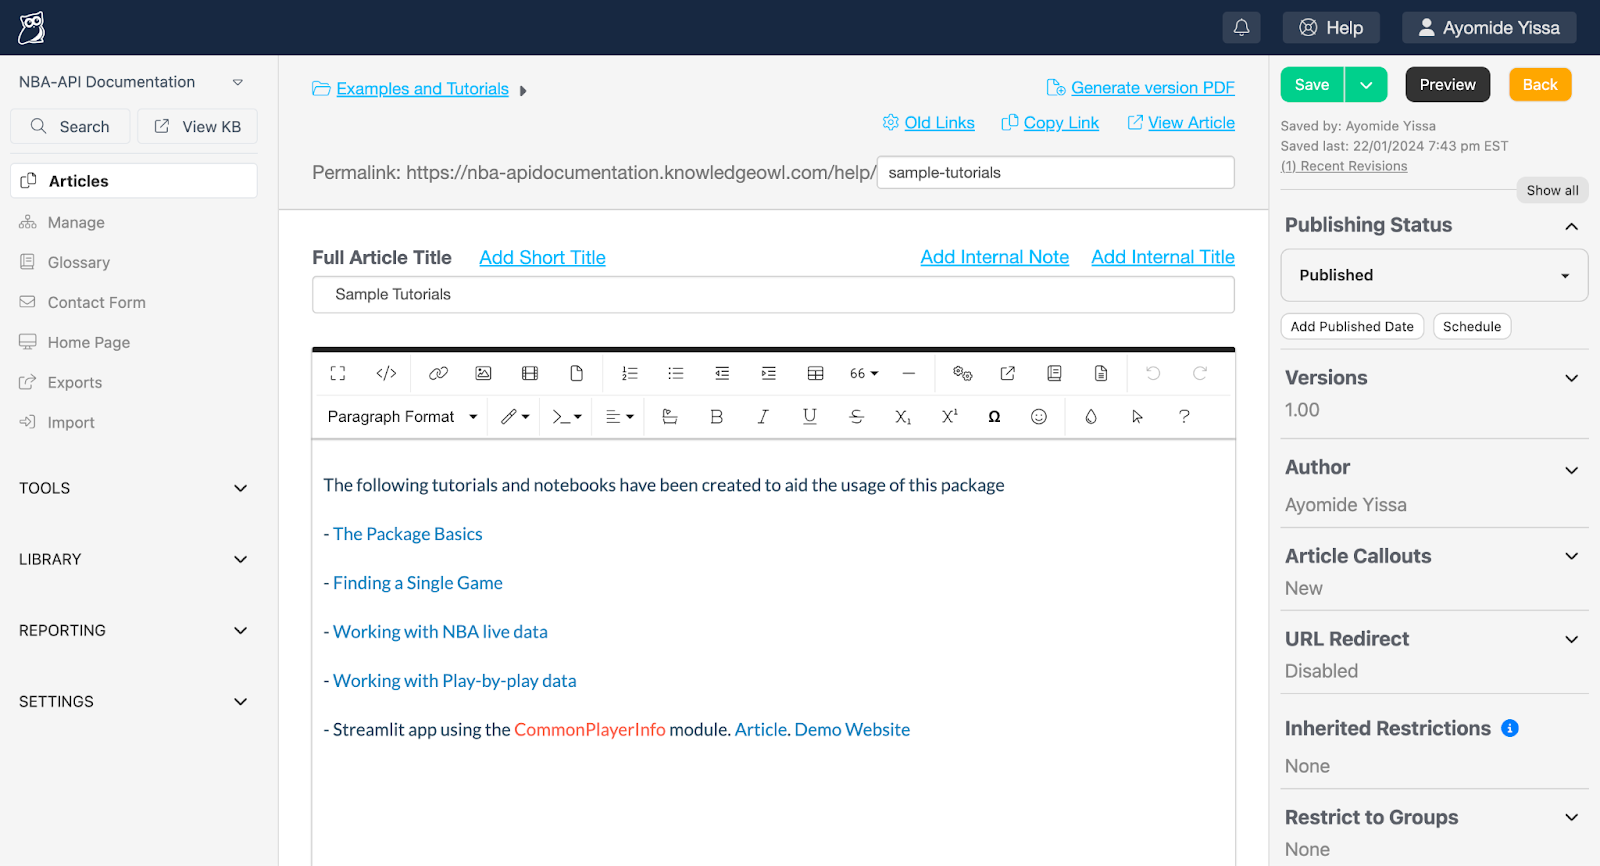 A screenshot of the editor view for an article in a KnowledgeOwl knowledge base titled, 